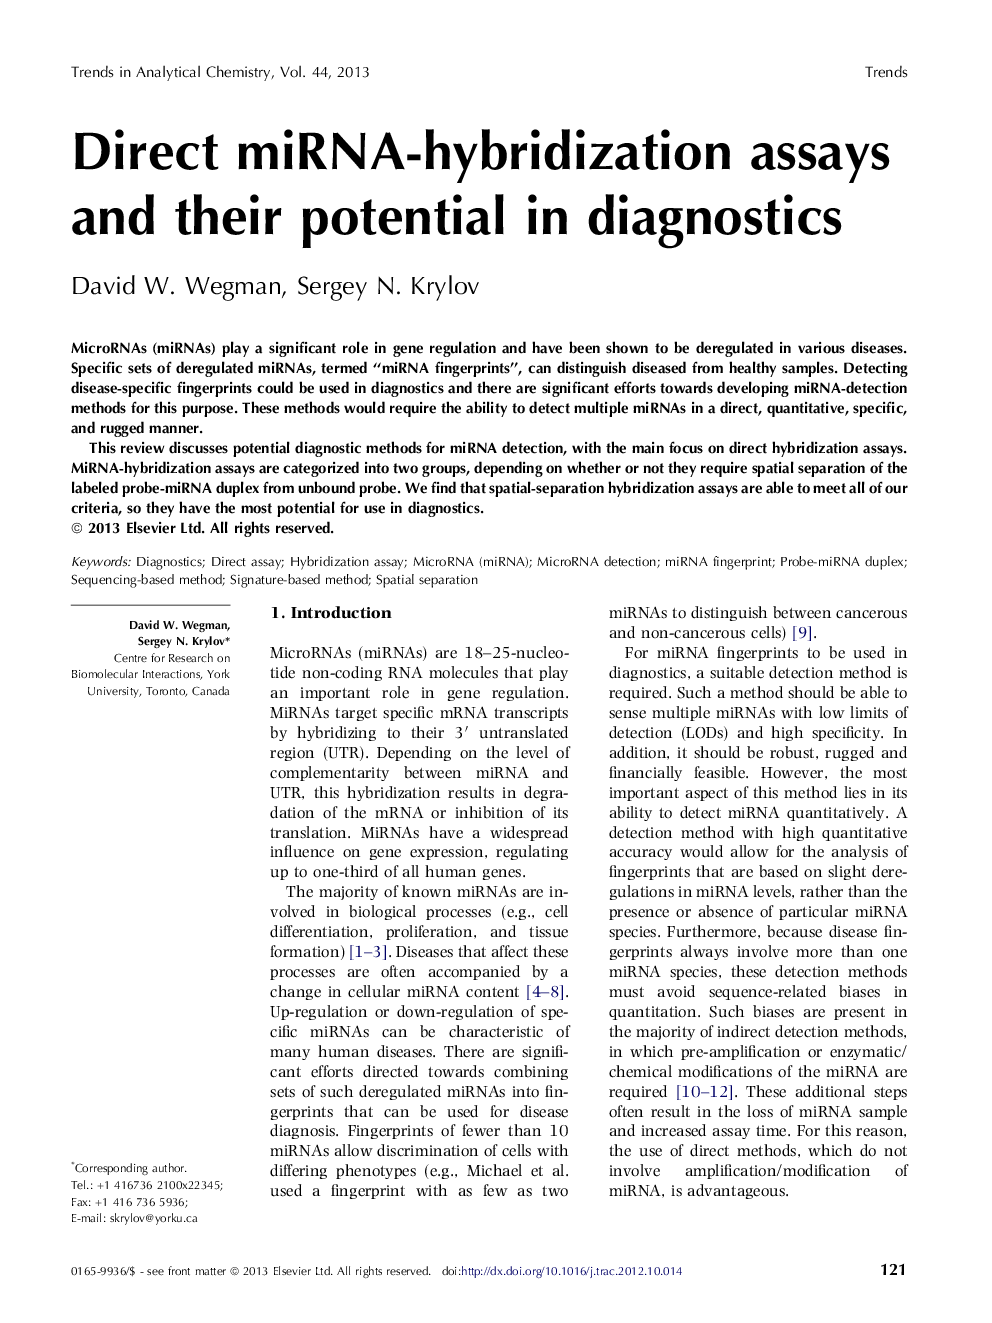 Direct miRNA-hybridization assays and their potential in diagnostics